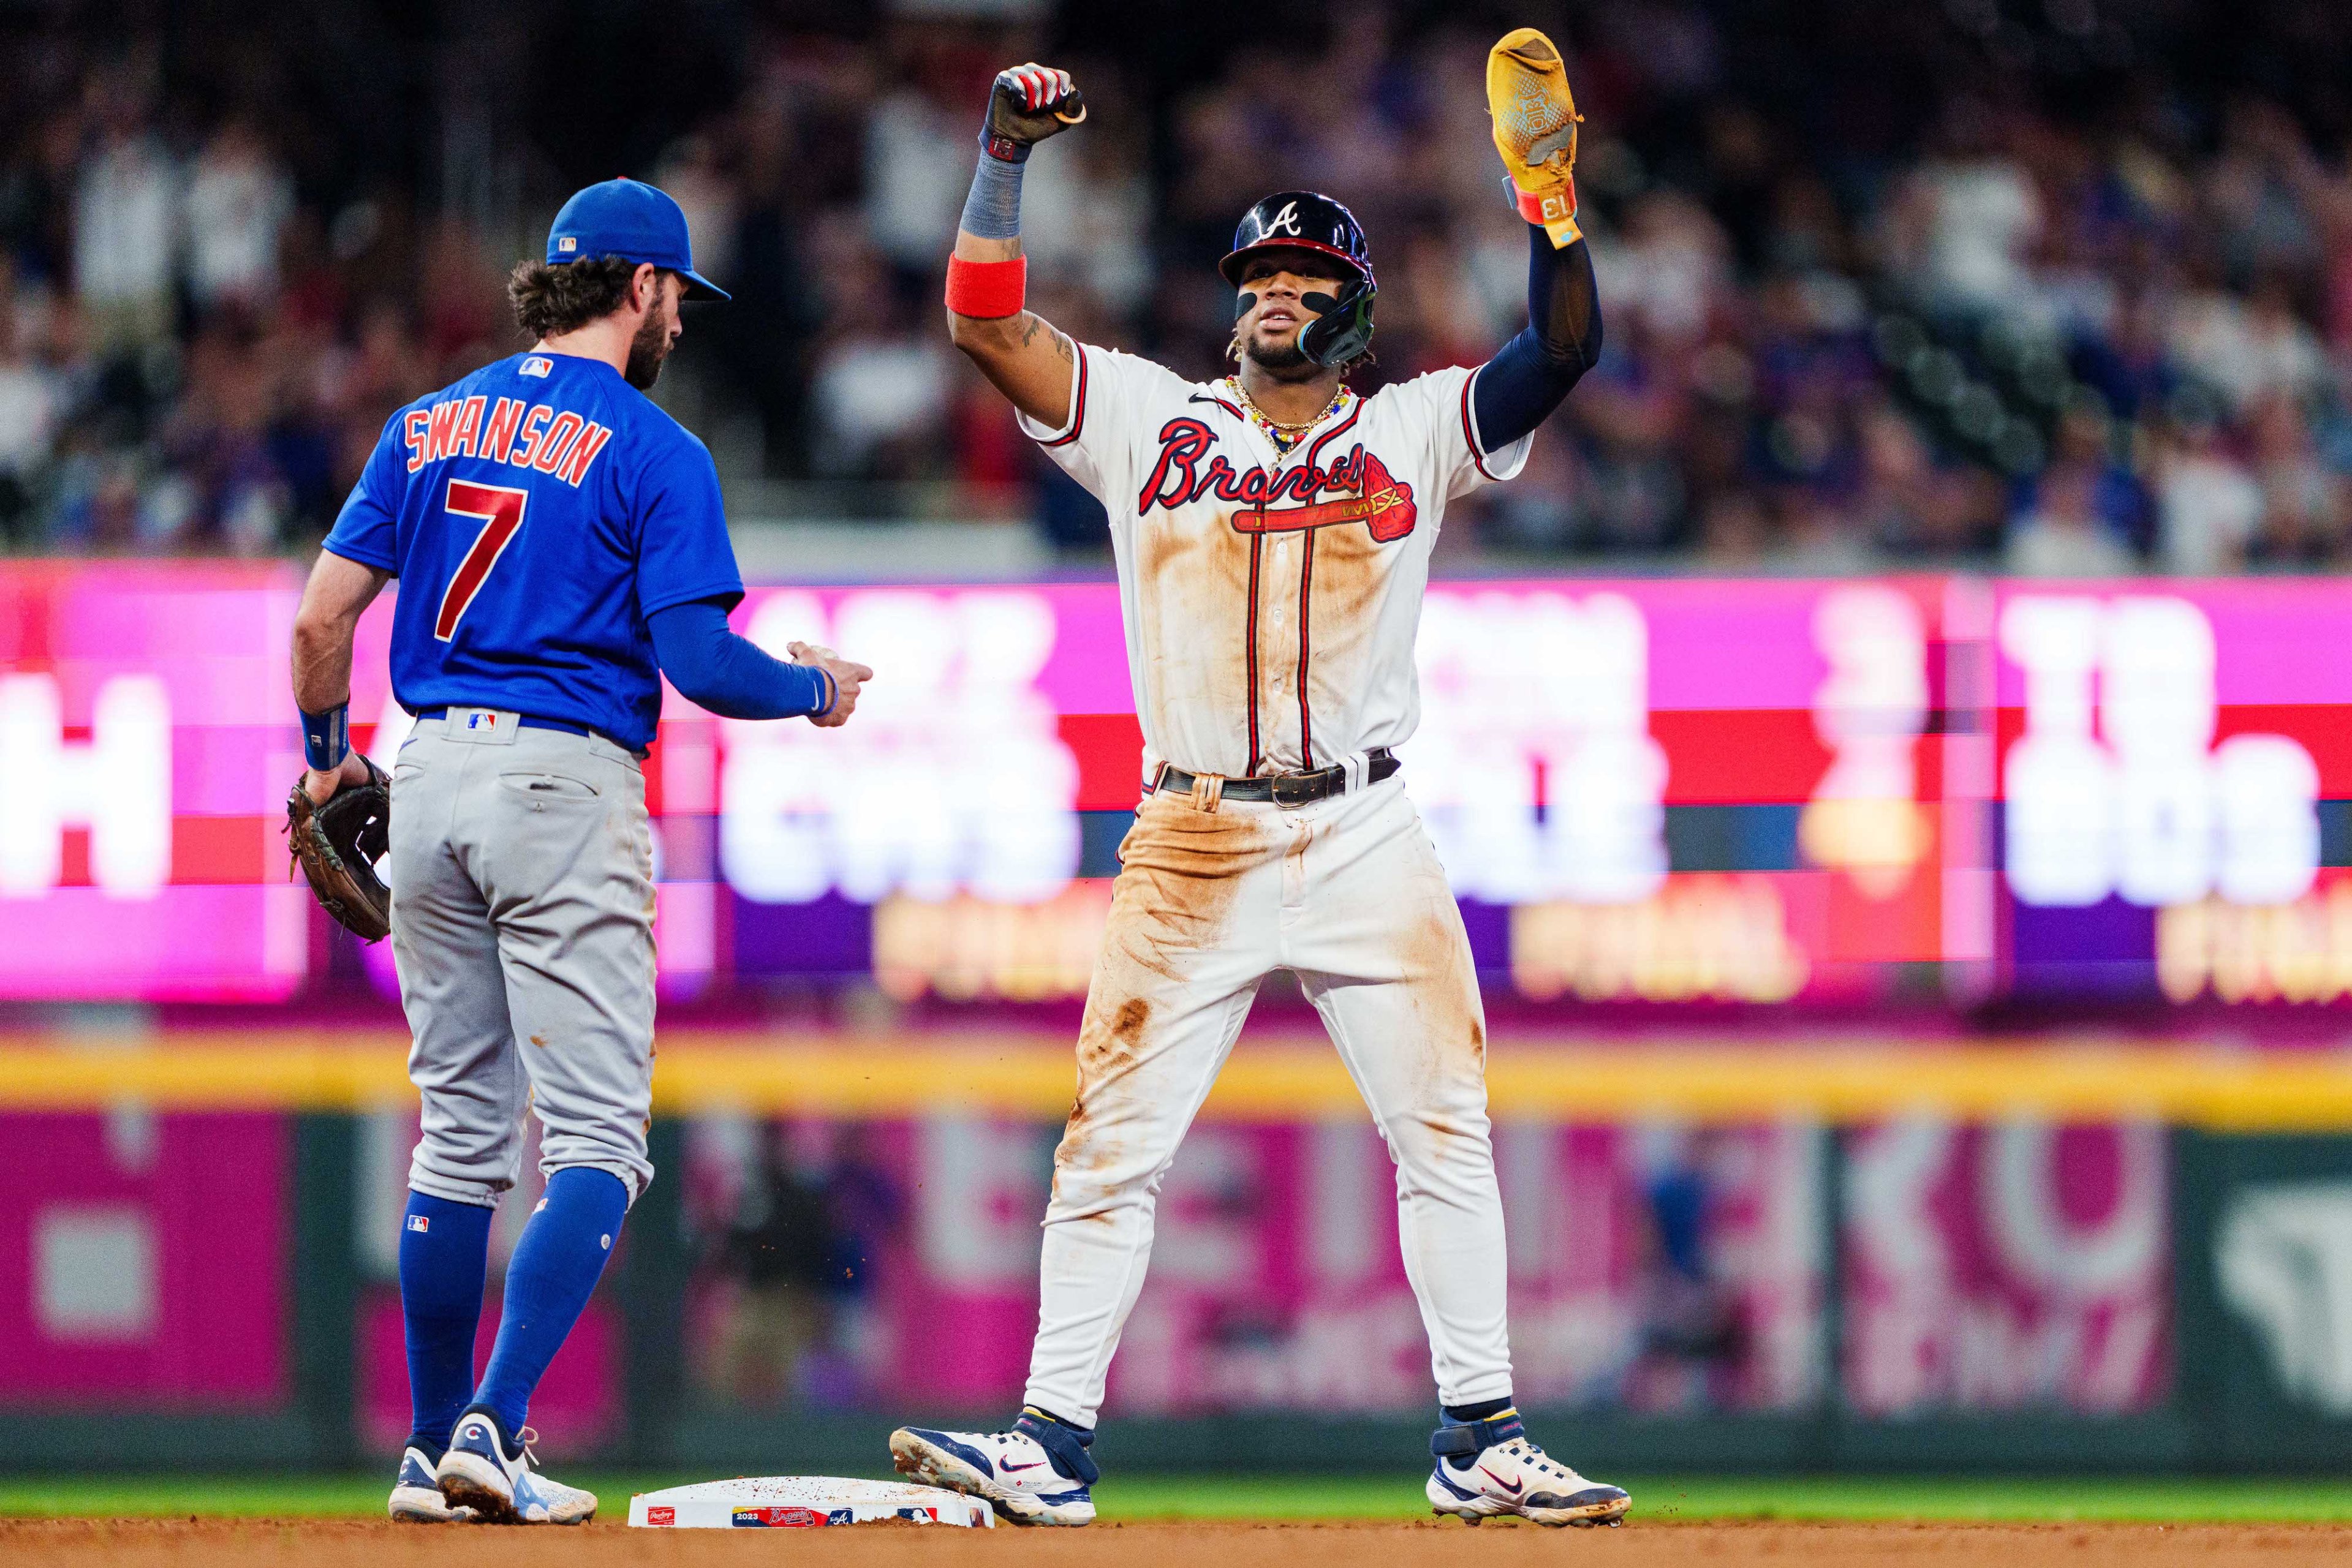 Ronald Acuña Jr. #13 of the Atlanta Braves celebrates after stealing second base in the tenth inning against the Chicago Cubs at Truist Park on September 27, 2023 in Atlanta, Georgia. Acuña Jr. is the first player in MLB history to hit 40 home runs and steal 70 bases in a single season.